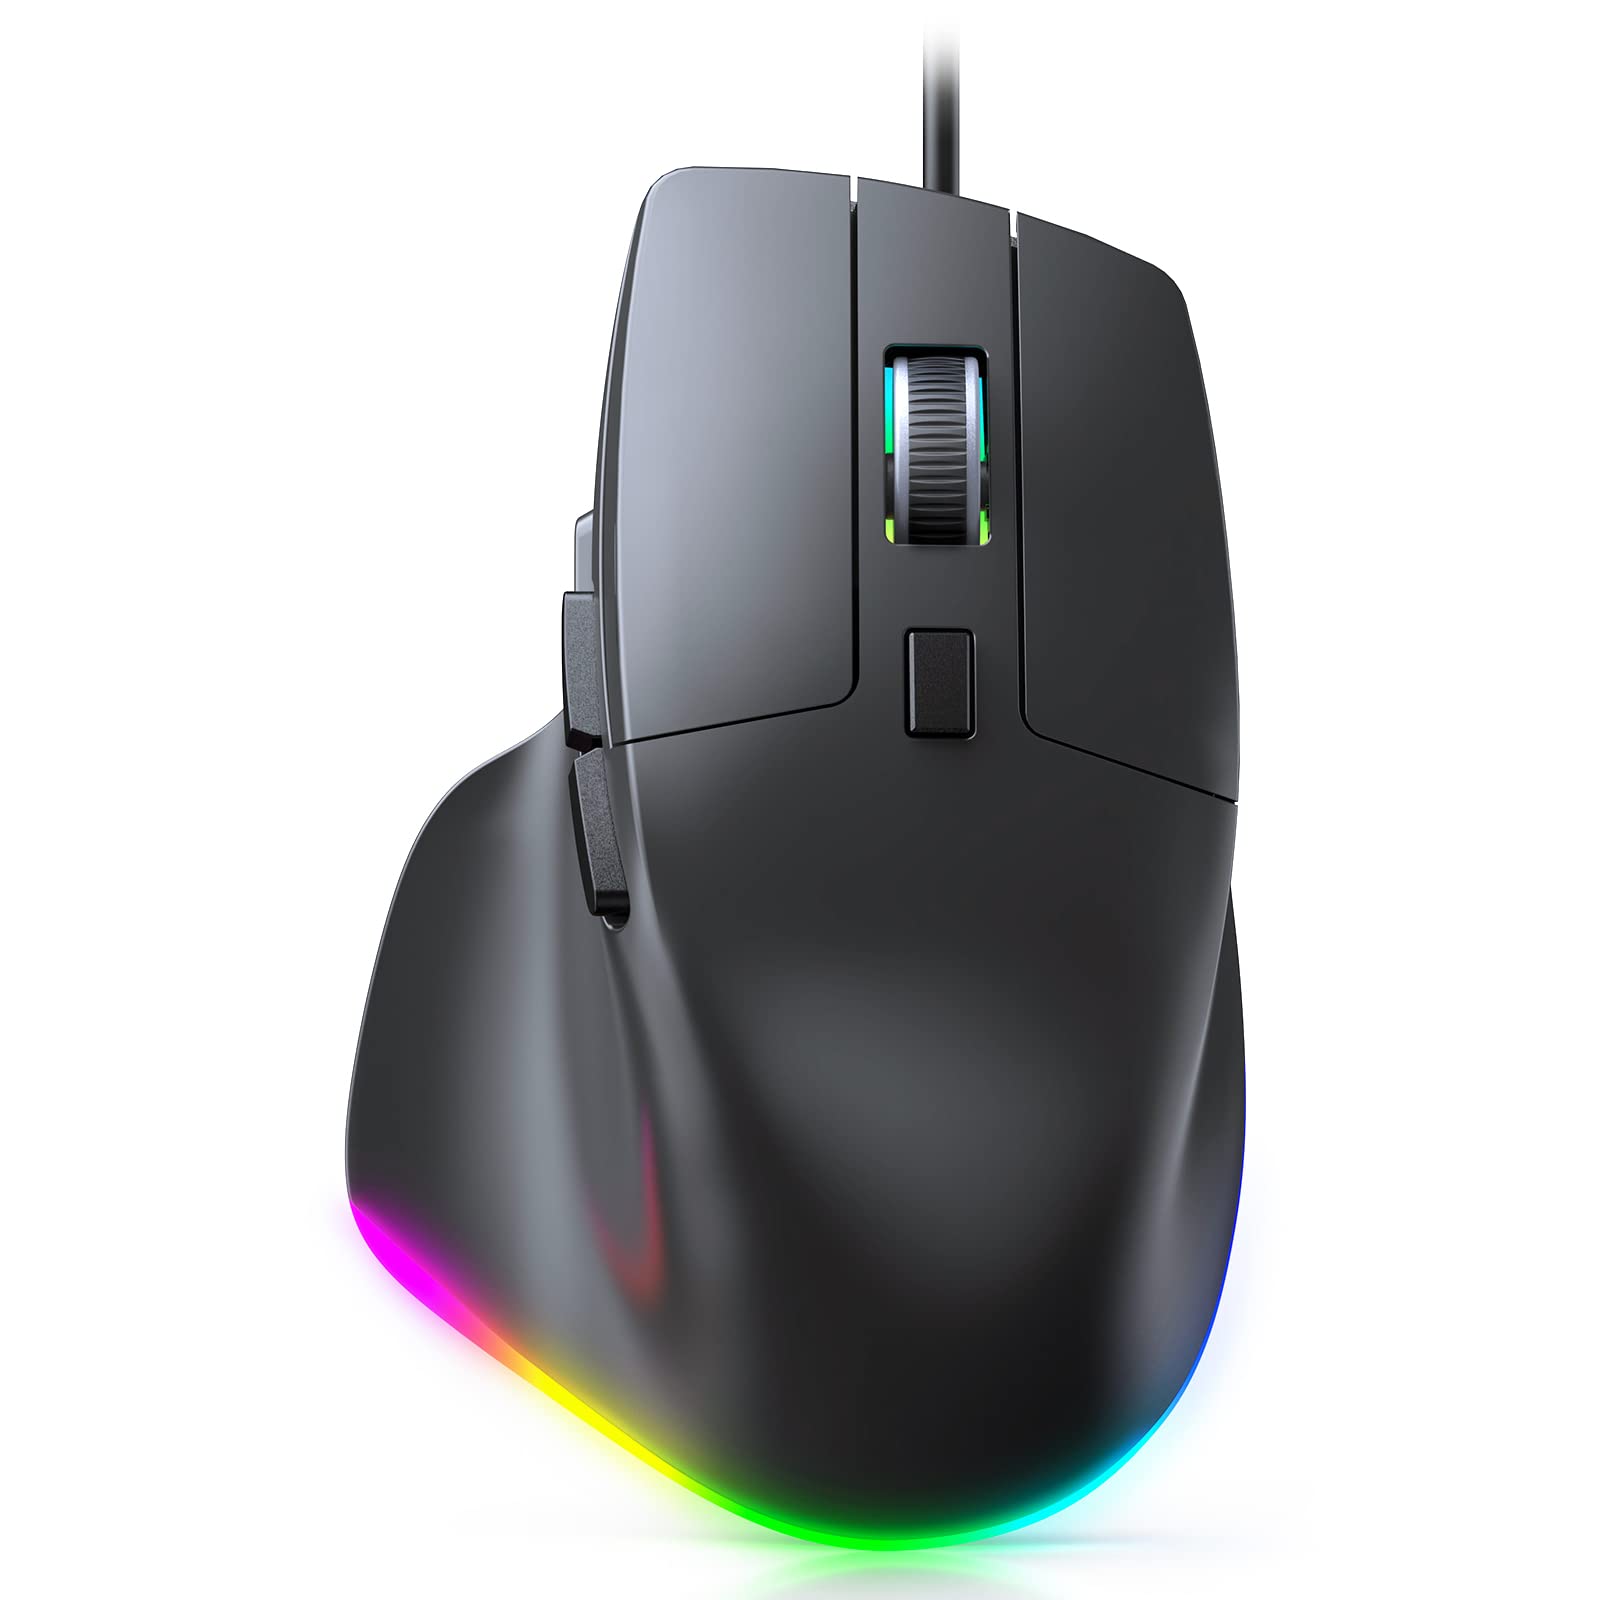 Image of a computer mouse connected to a laptop or desktop computer.